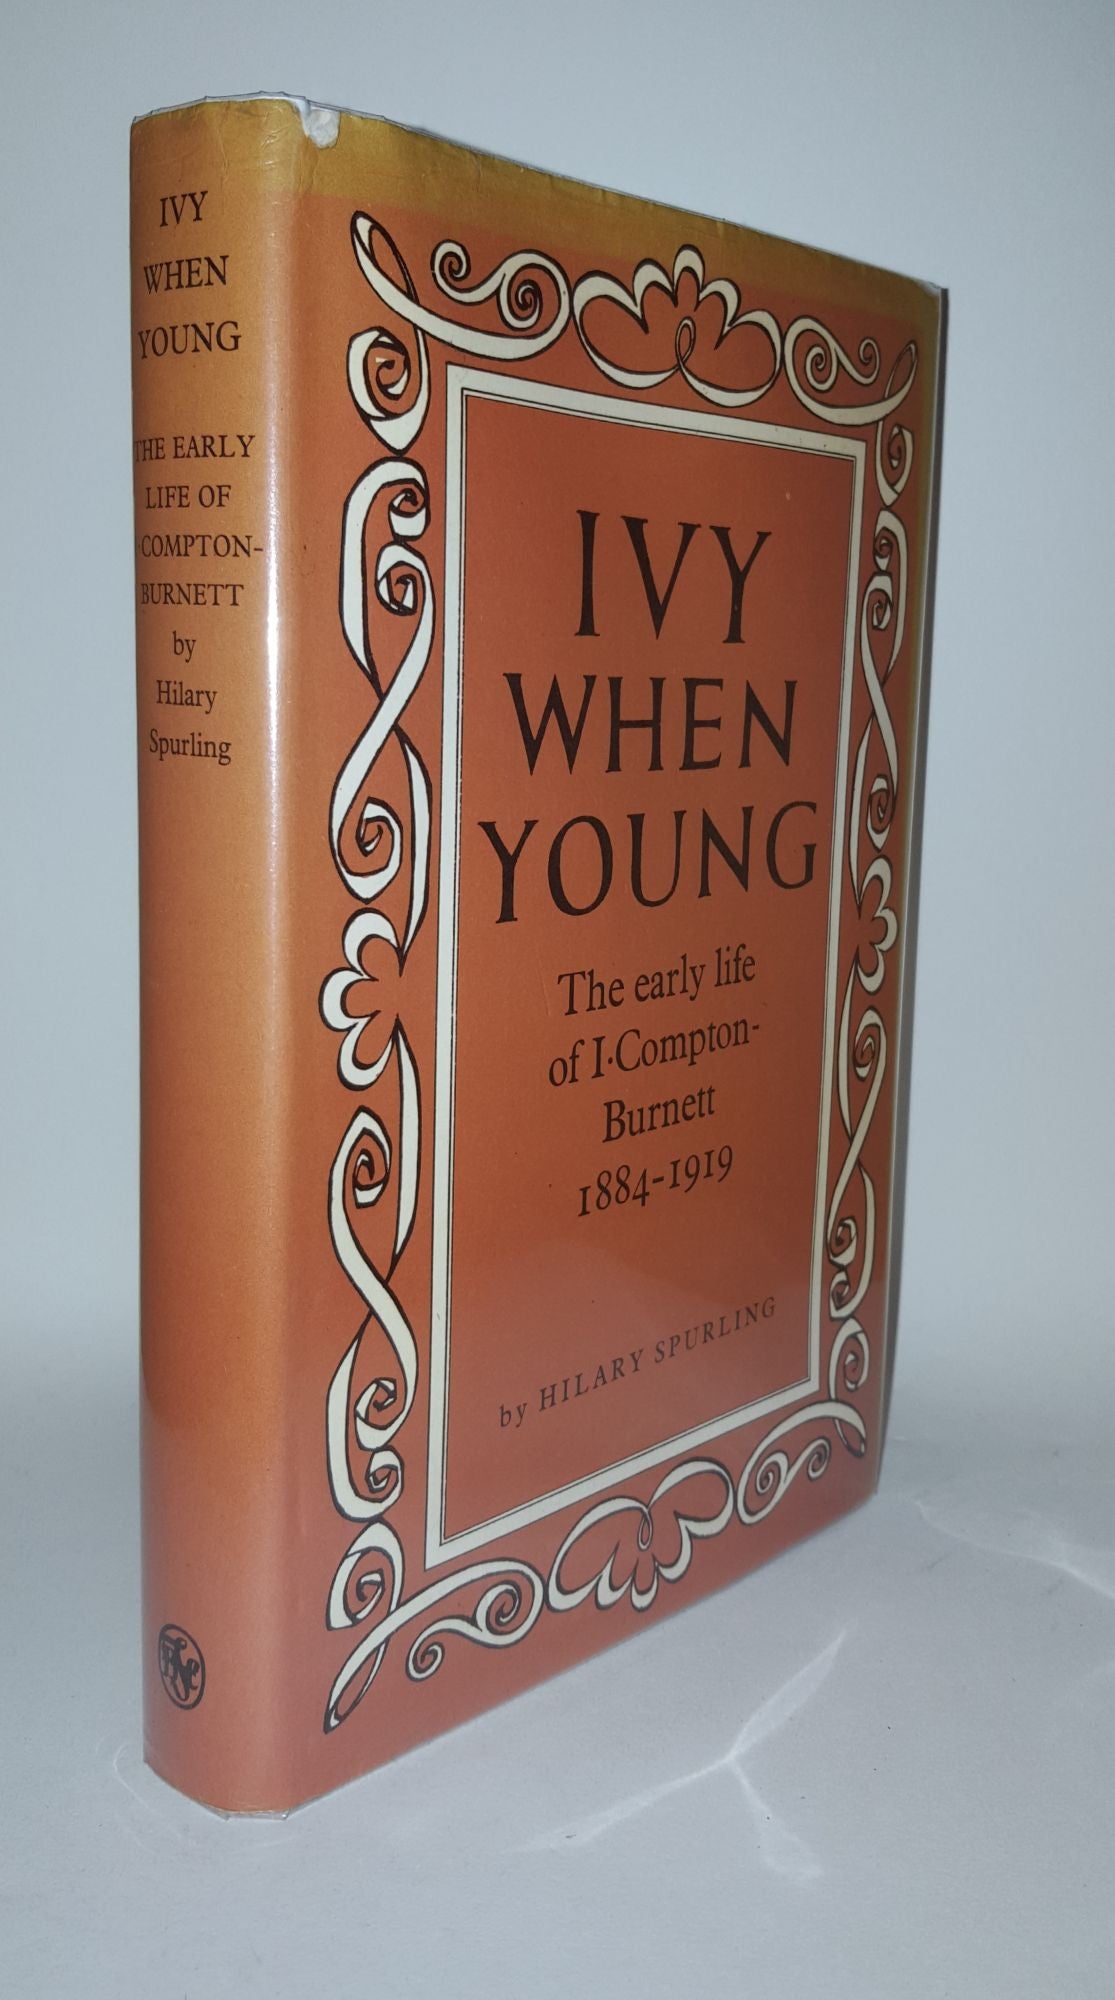 SPURLING Hilary - Ivy When Young the Early Life of I. Compton-Burnett 1884 - 1919